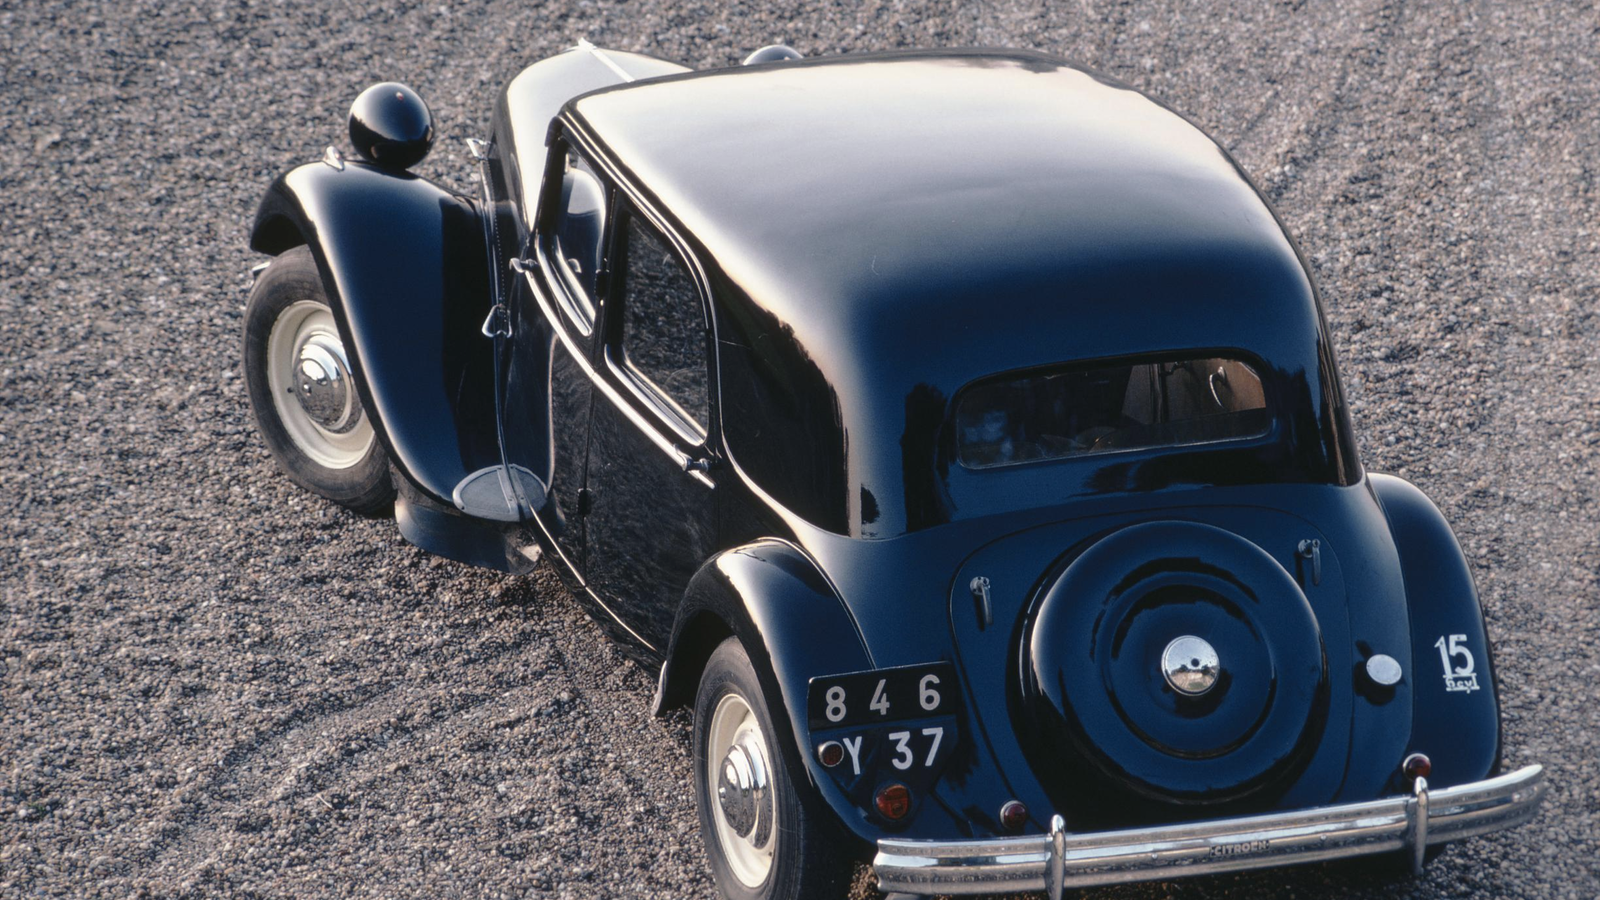 Ten classic car designs that were changed at the last minute